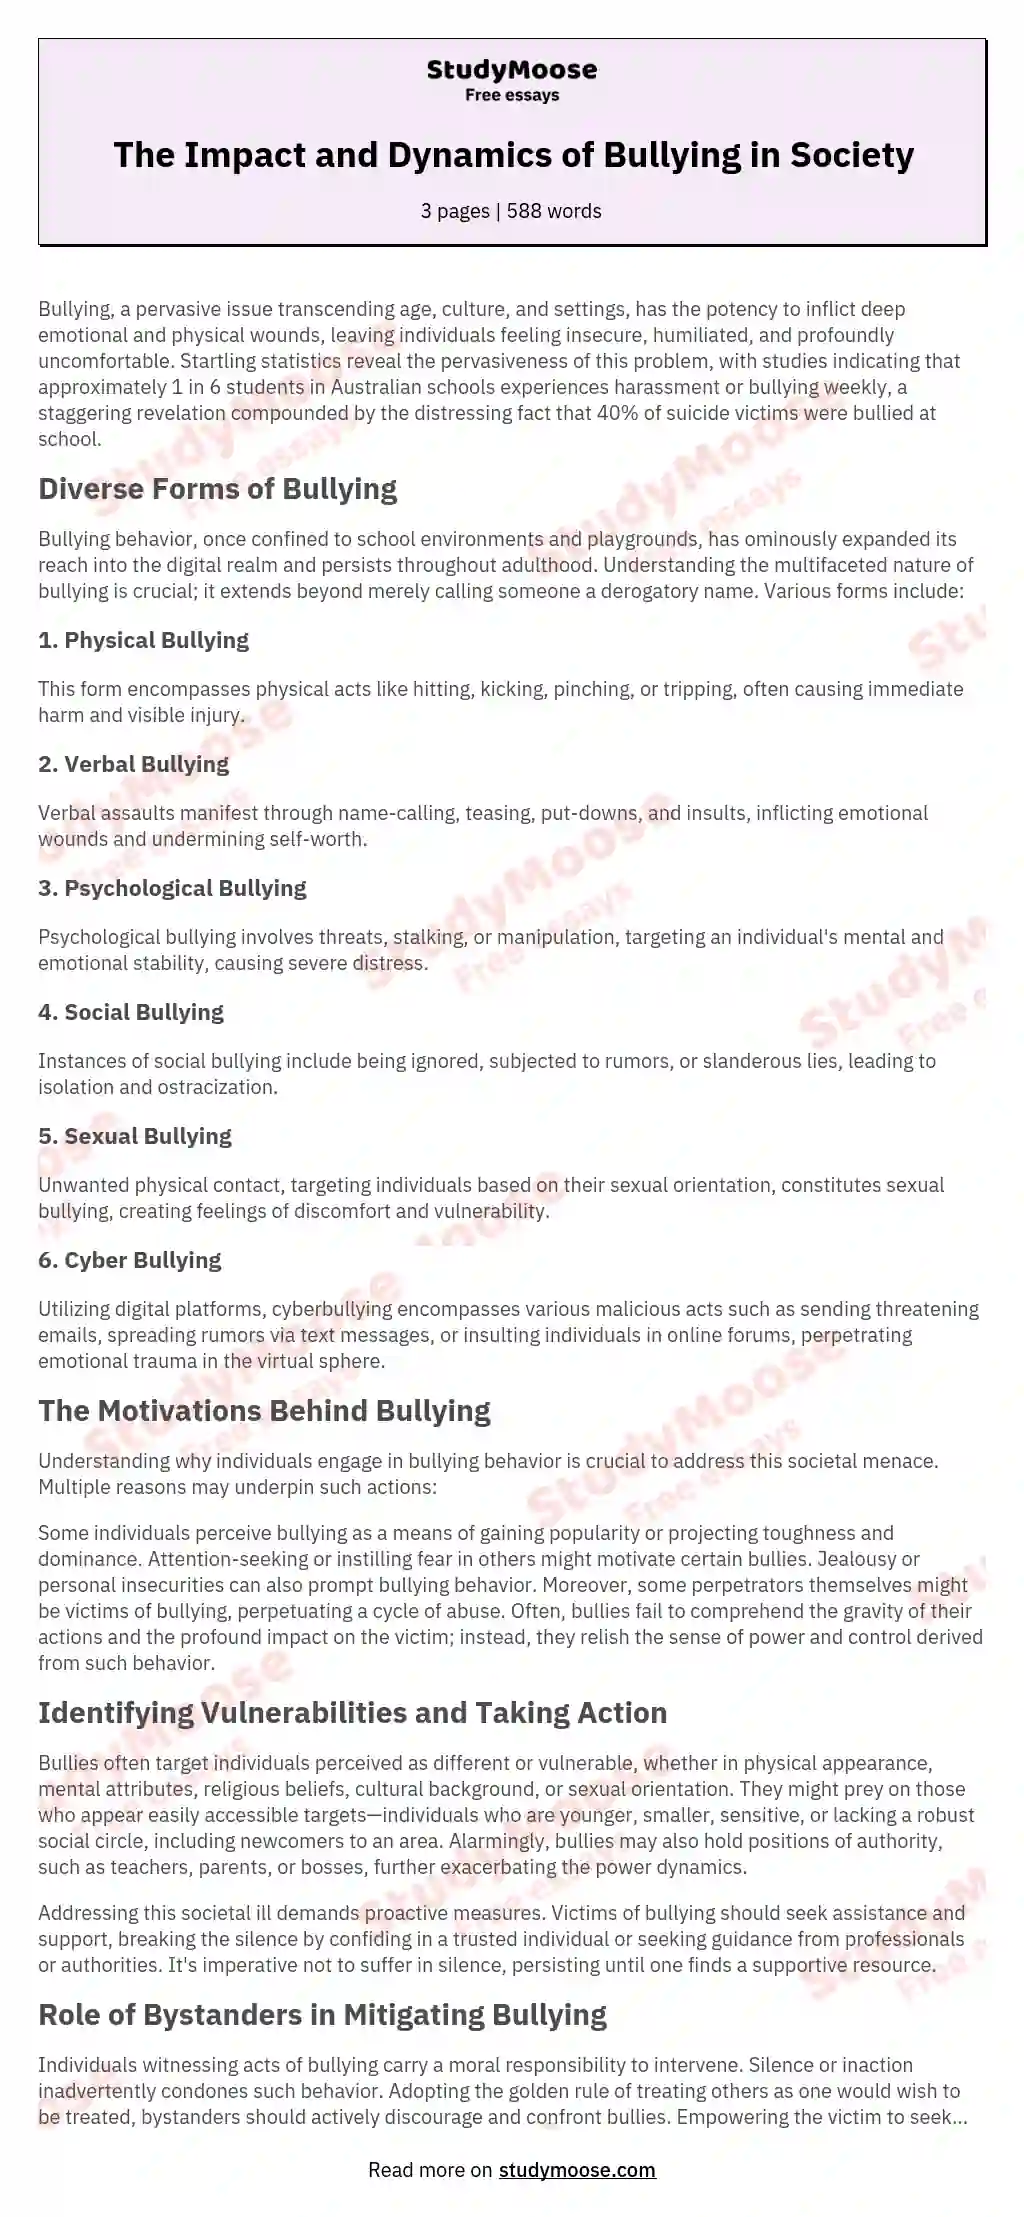 The Impact and Dynamics of Bullying in Society essay